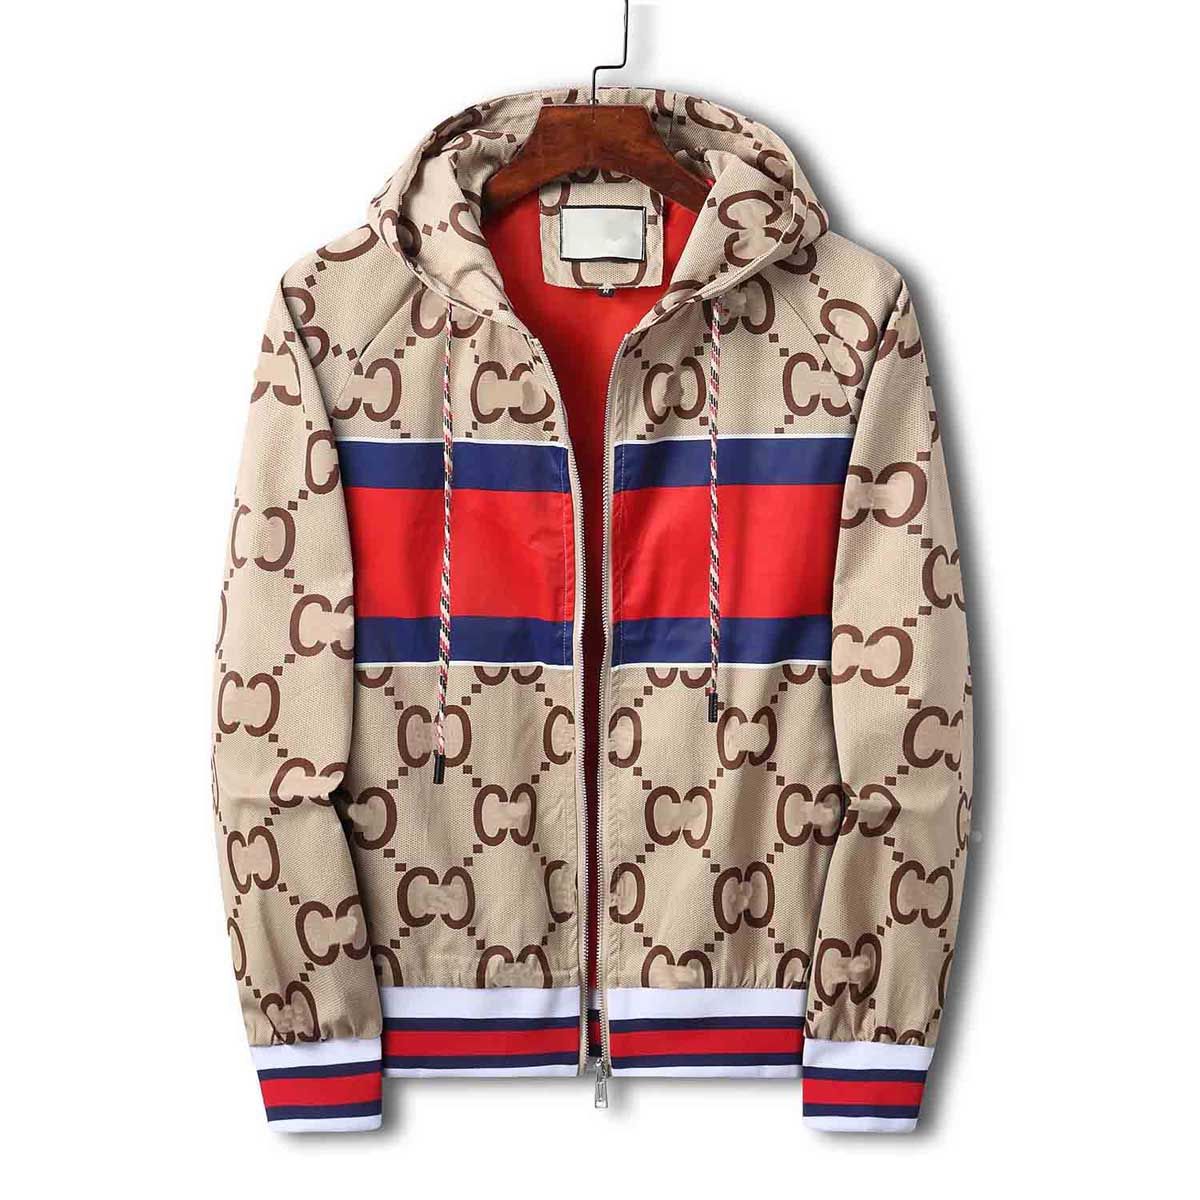 gucci jacket dhgate the top 